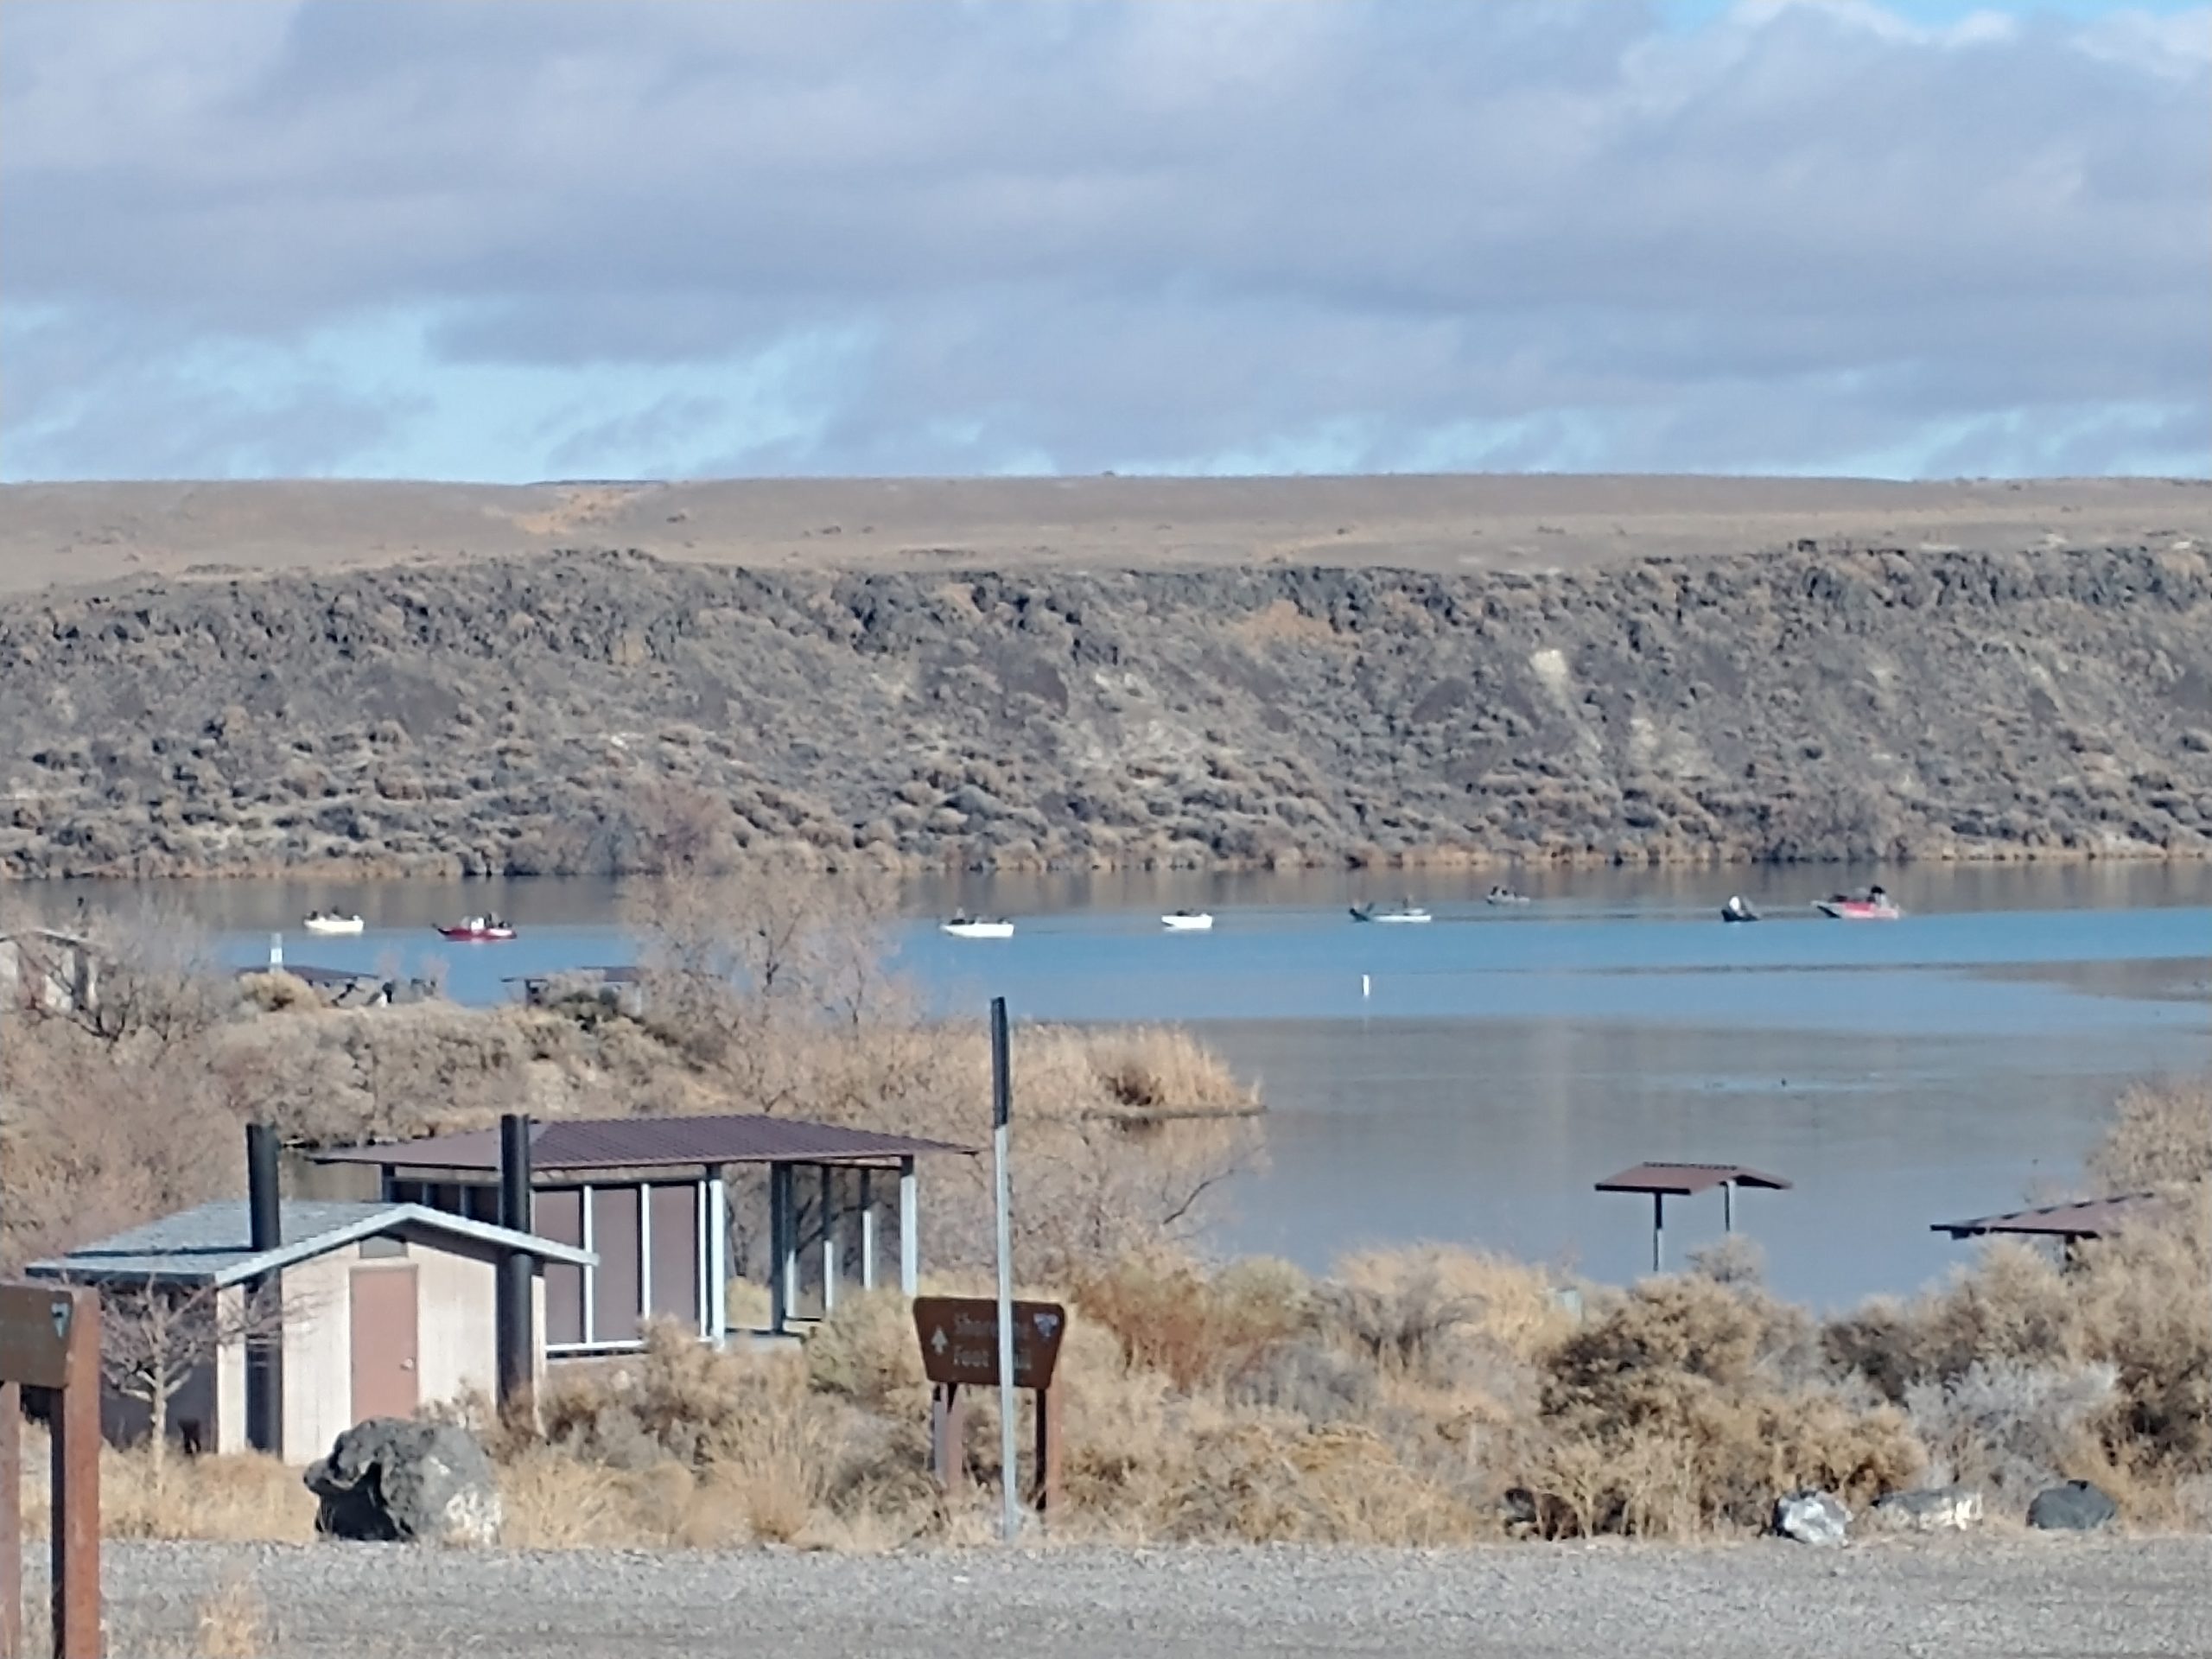 campground at cj strike with the lake in the background and fishing boats on the lake